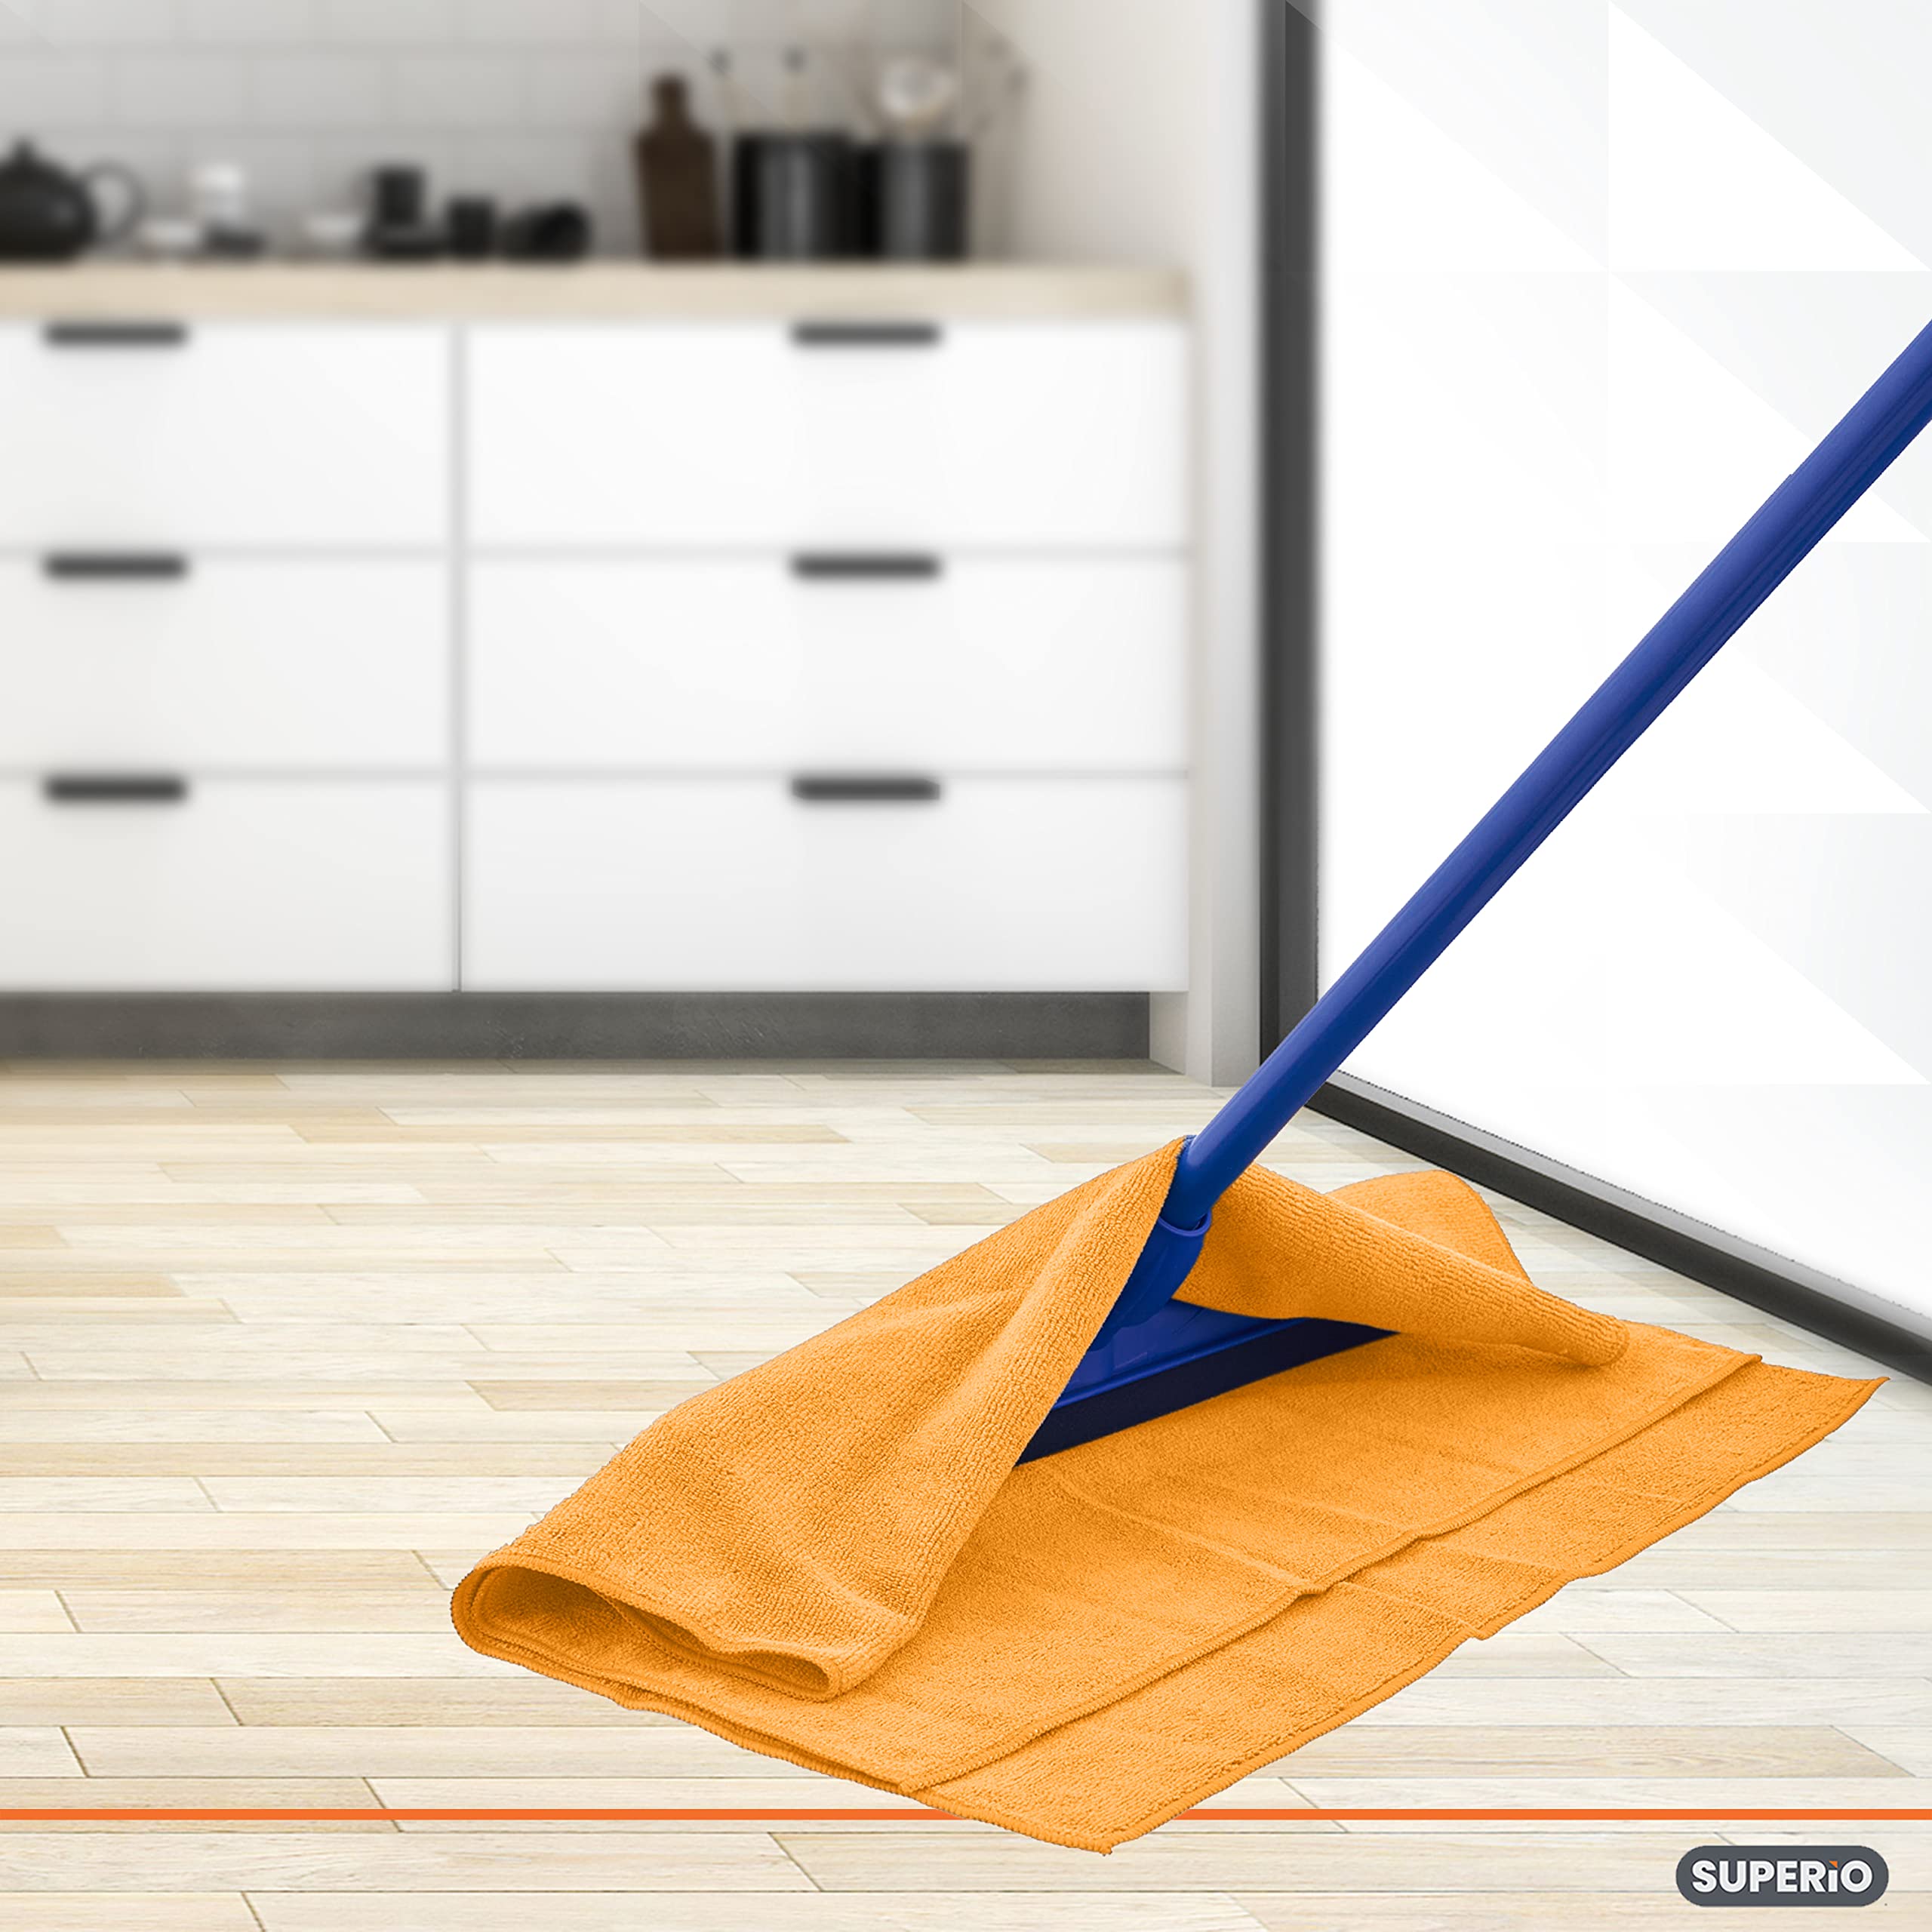 Microfiber Squeegee Mopping Towel Extra Large Miracle Cloth Streak Free Floor Cloth 20x30 House, Kitchen, Bathroom, Car Multi Colored, 5 Pack